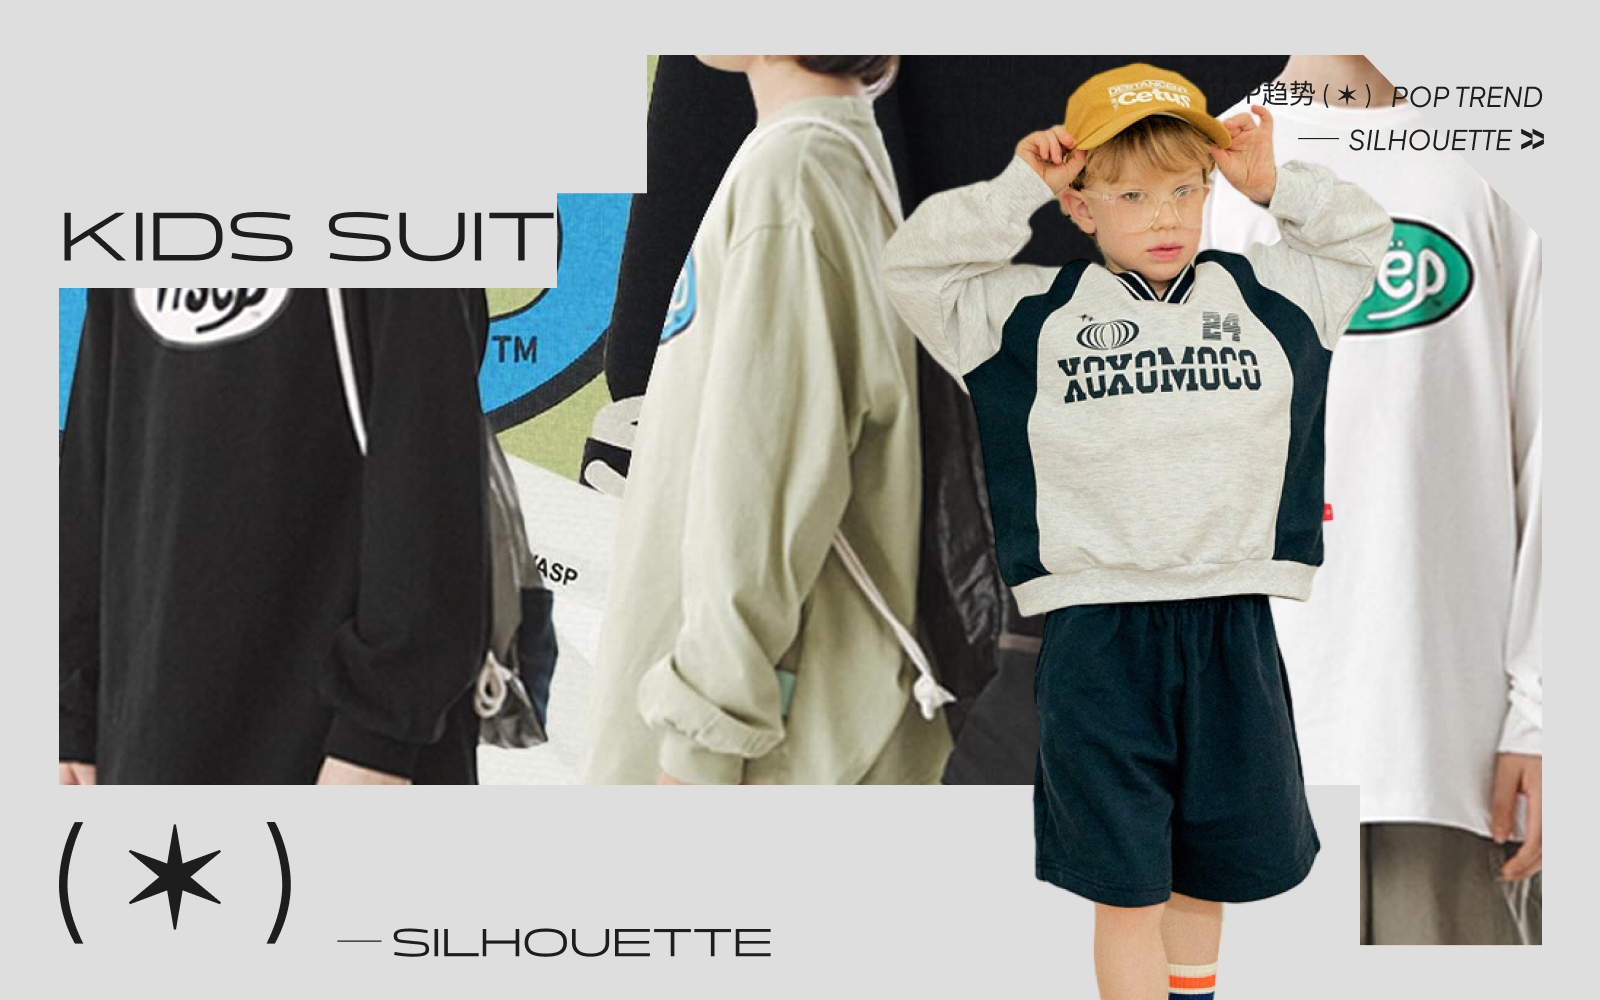 Set -- The Silhouette Trend for Kidswear